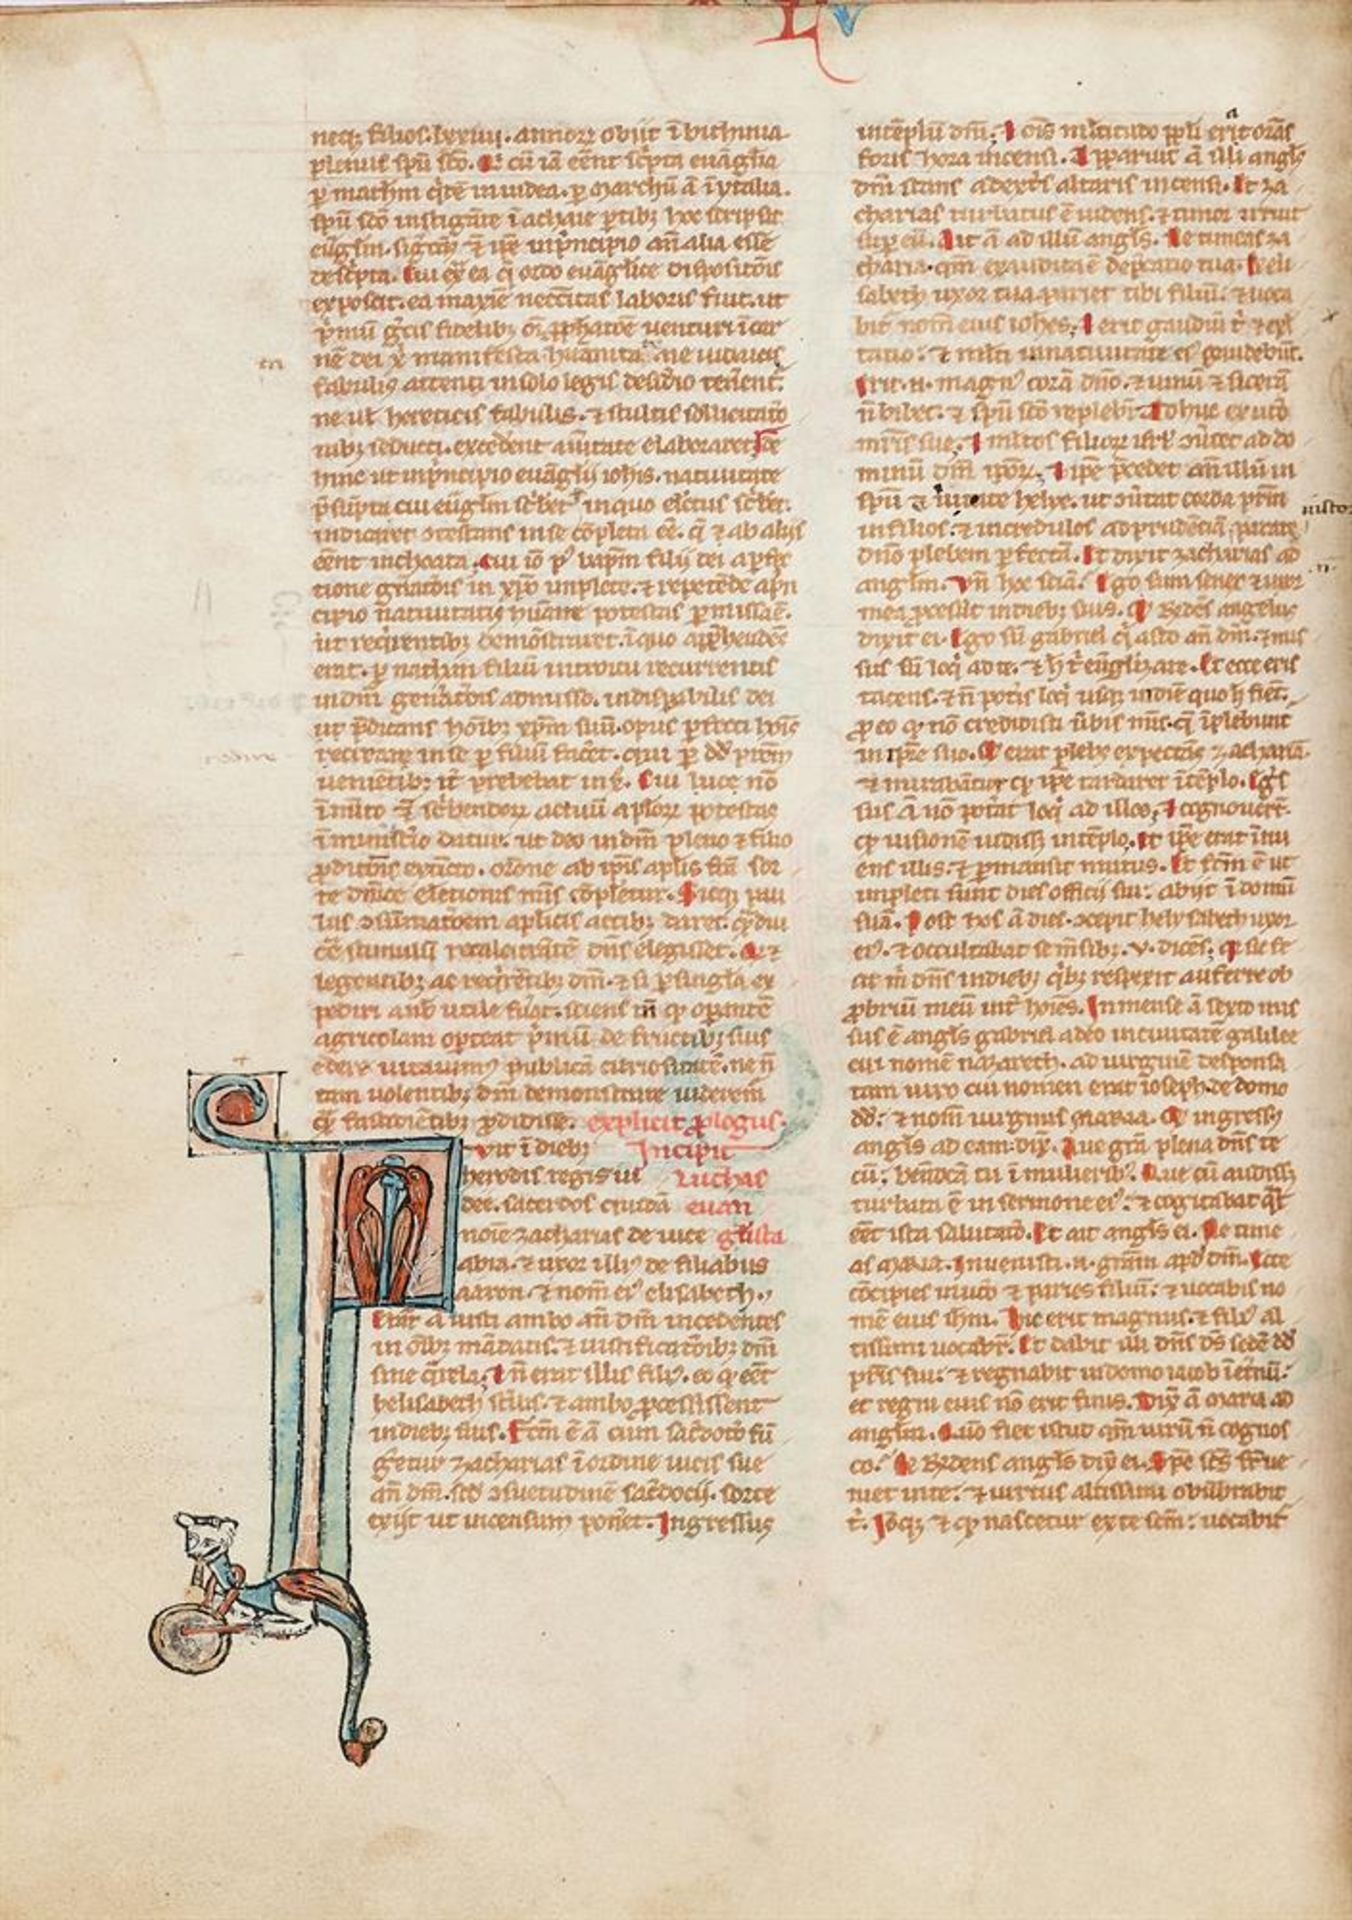 Ɵ The Bishop Carr Bible, in Latin, decorated manuscript on parchment - Image 7 of 10